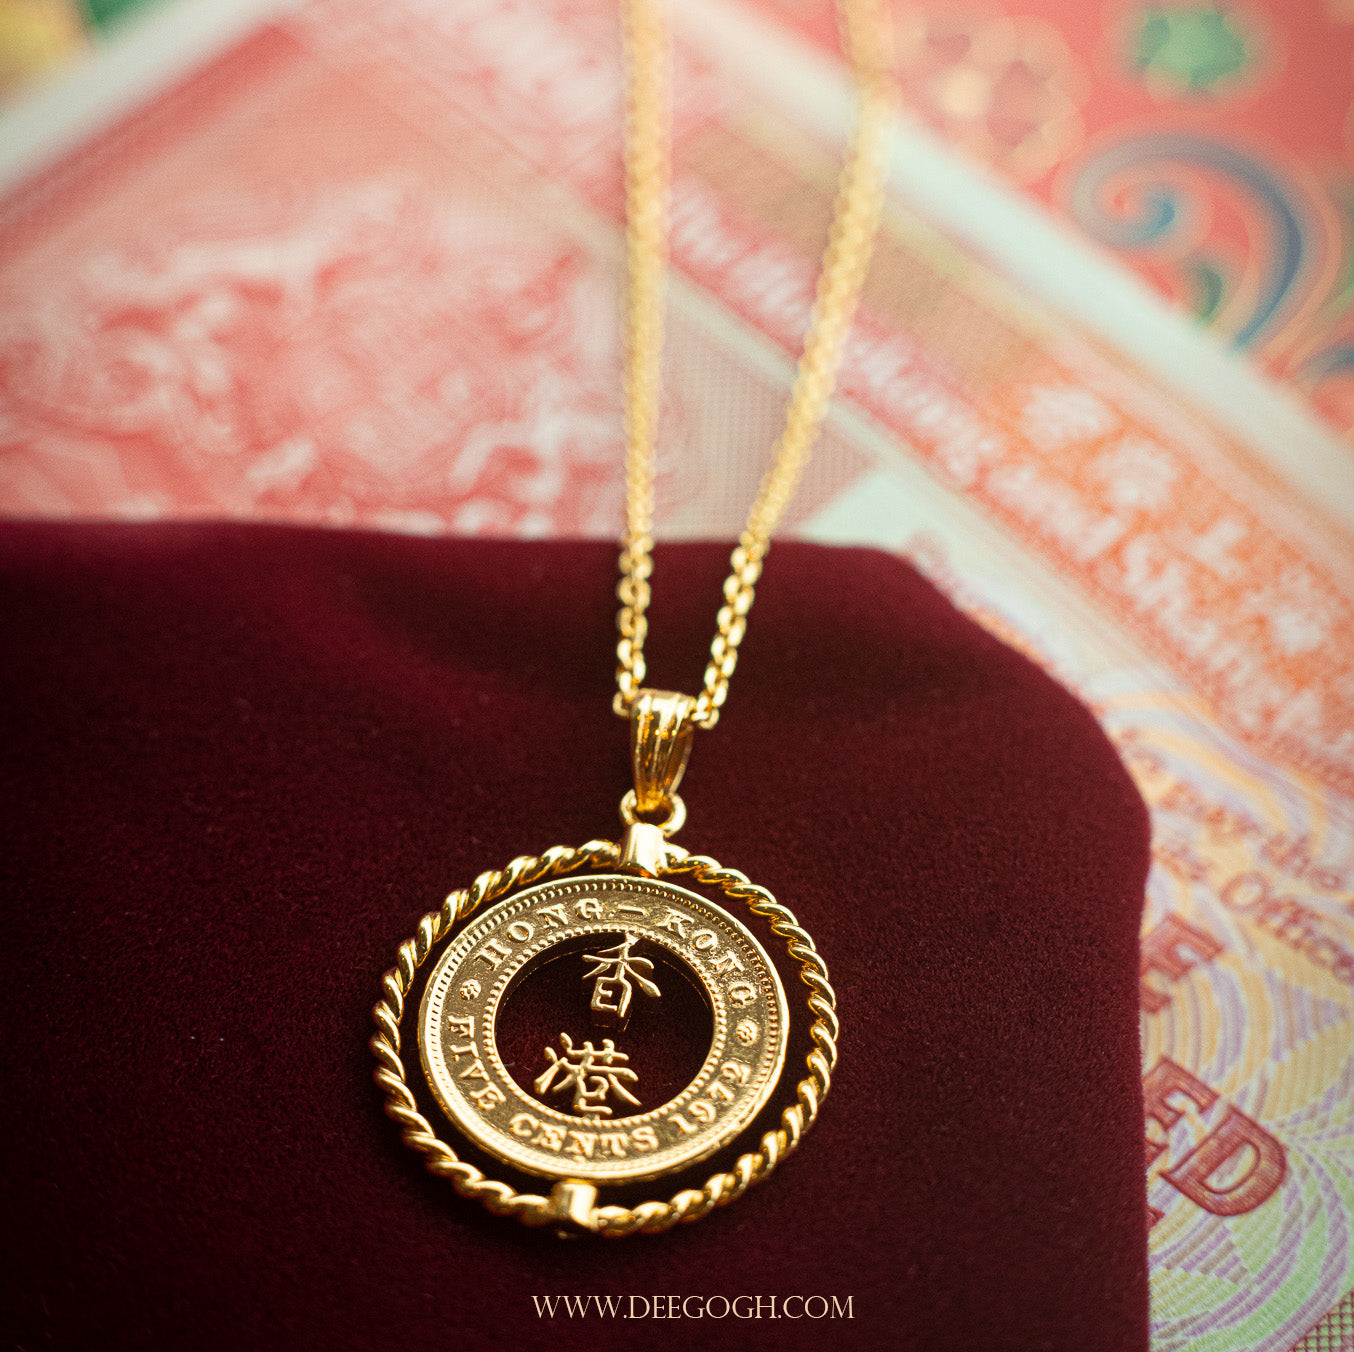 The "Homesick" Pendant with Hong Kong Old 5 Cents (Dynamic Version)